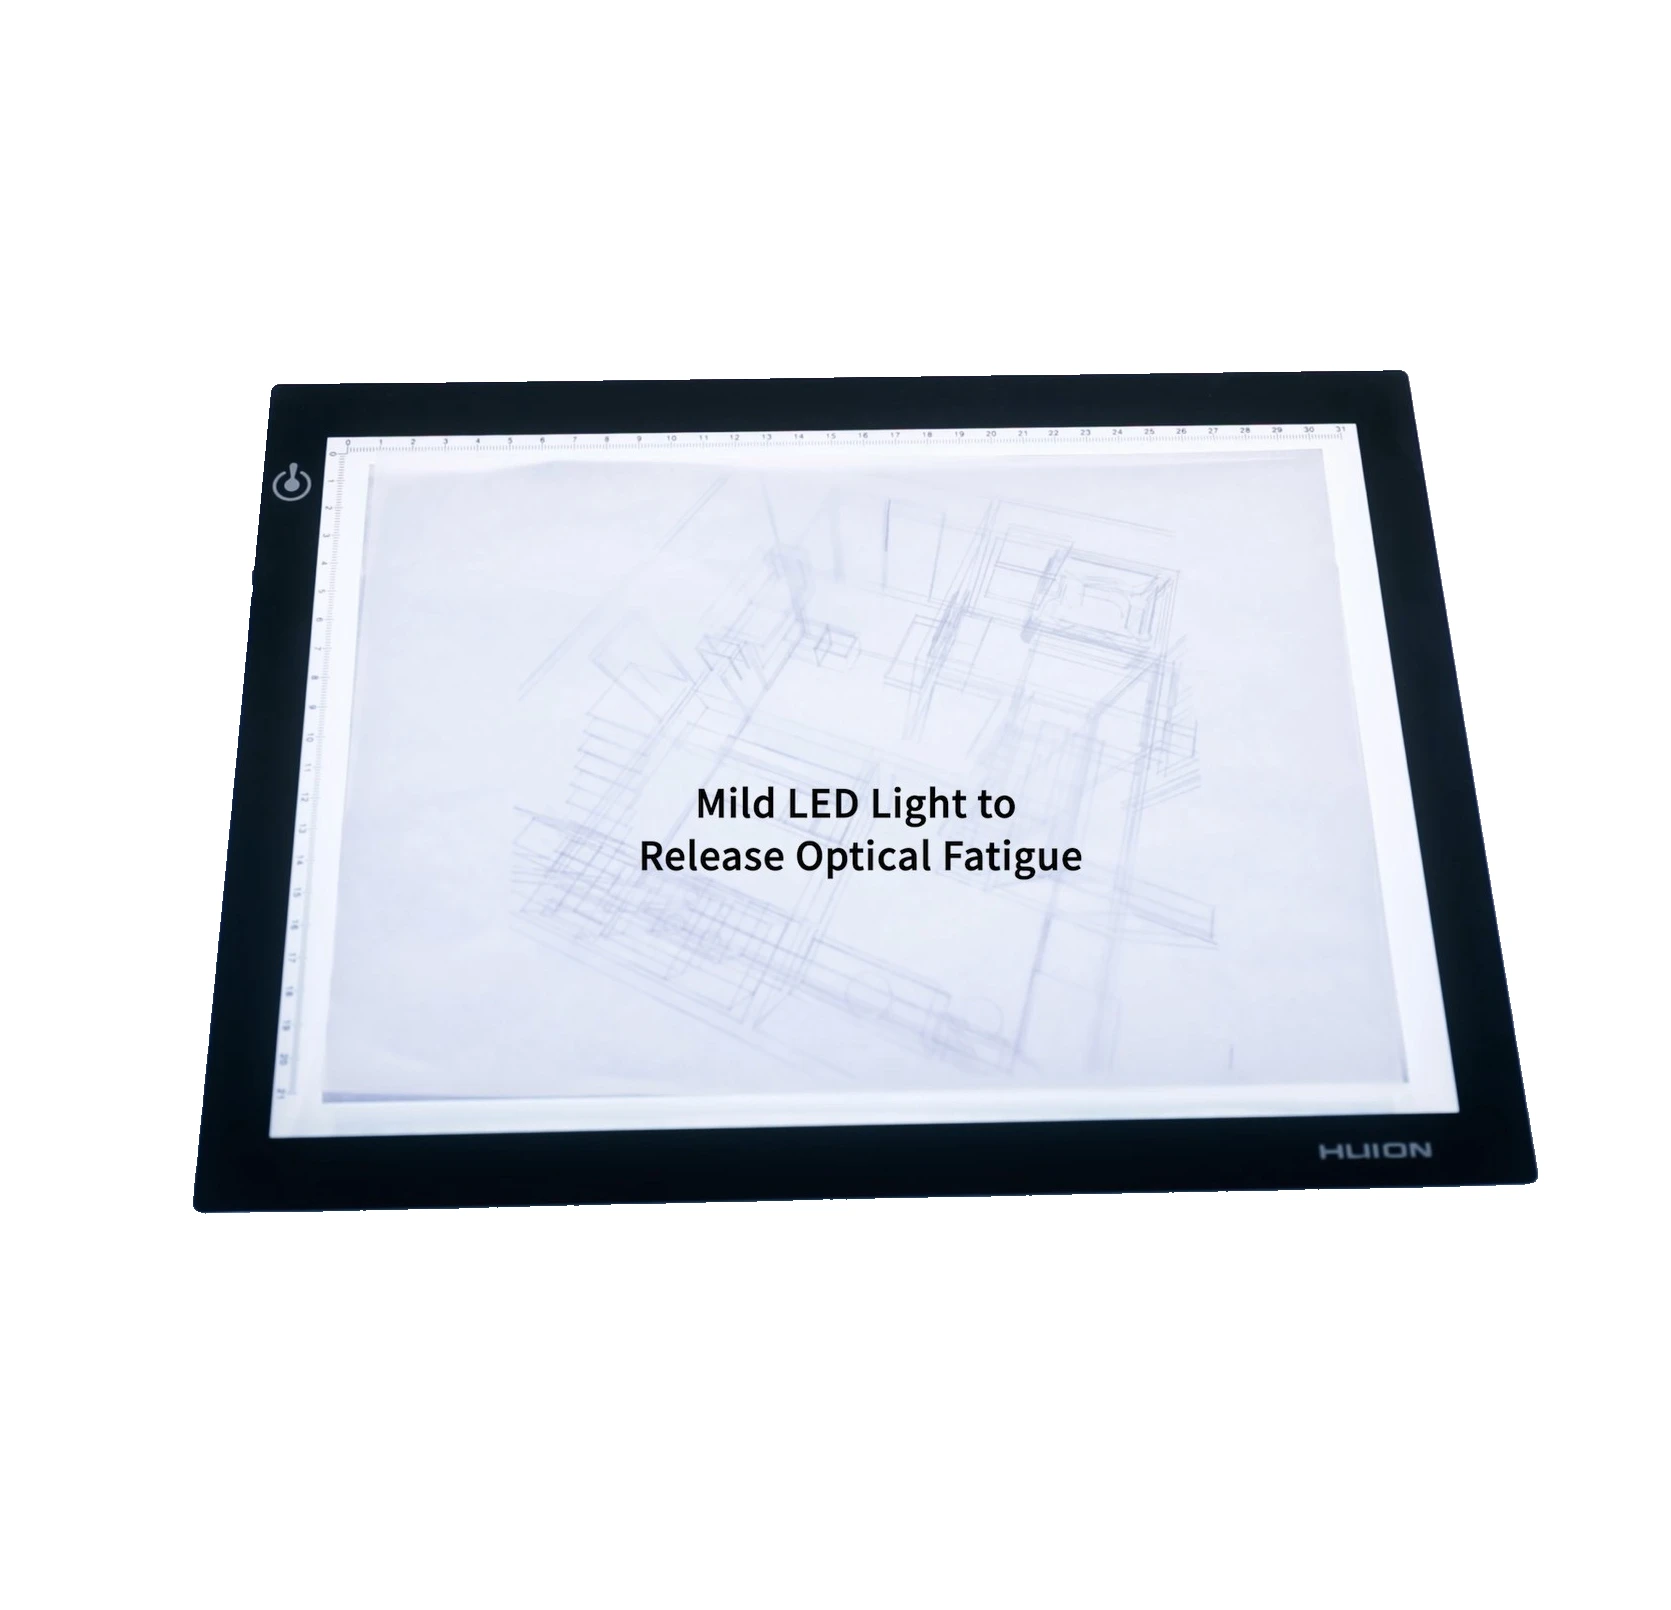 Higher Transparency Acrylic working surface Huion L4S brightness memory stepless adjustment led light pad